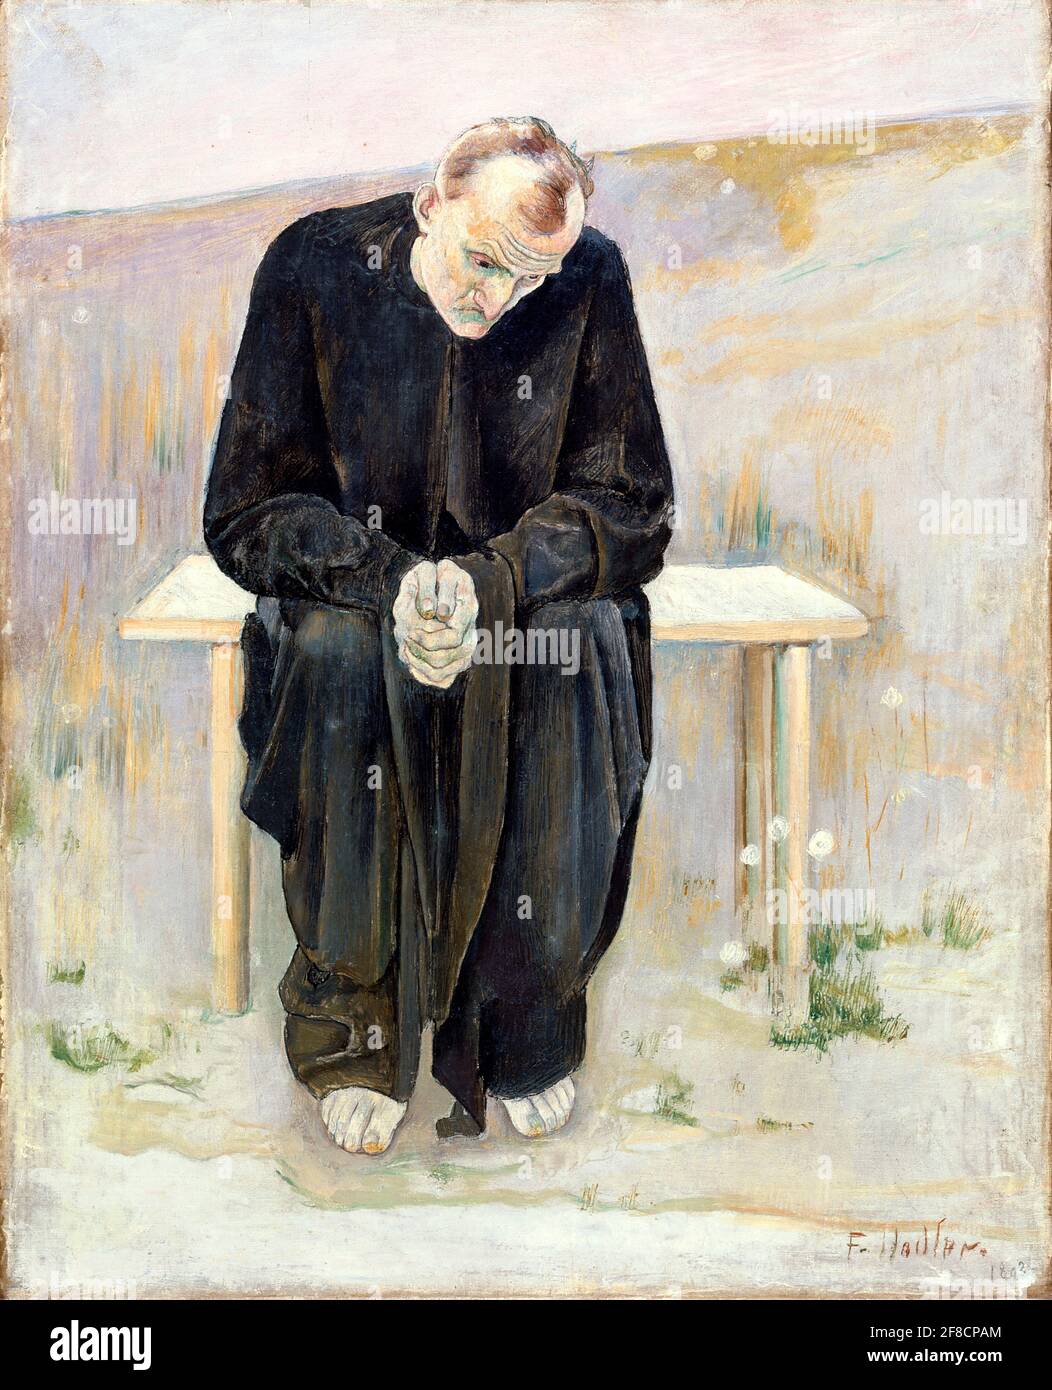 Ferdinand Hodler. Painting entitled 'The Disillusioned One' by the Swiss symbolist painter, Ferdinand Hodler (1853- 1918). oil on canvas, 1892 Stock Photo